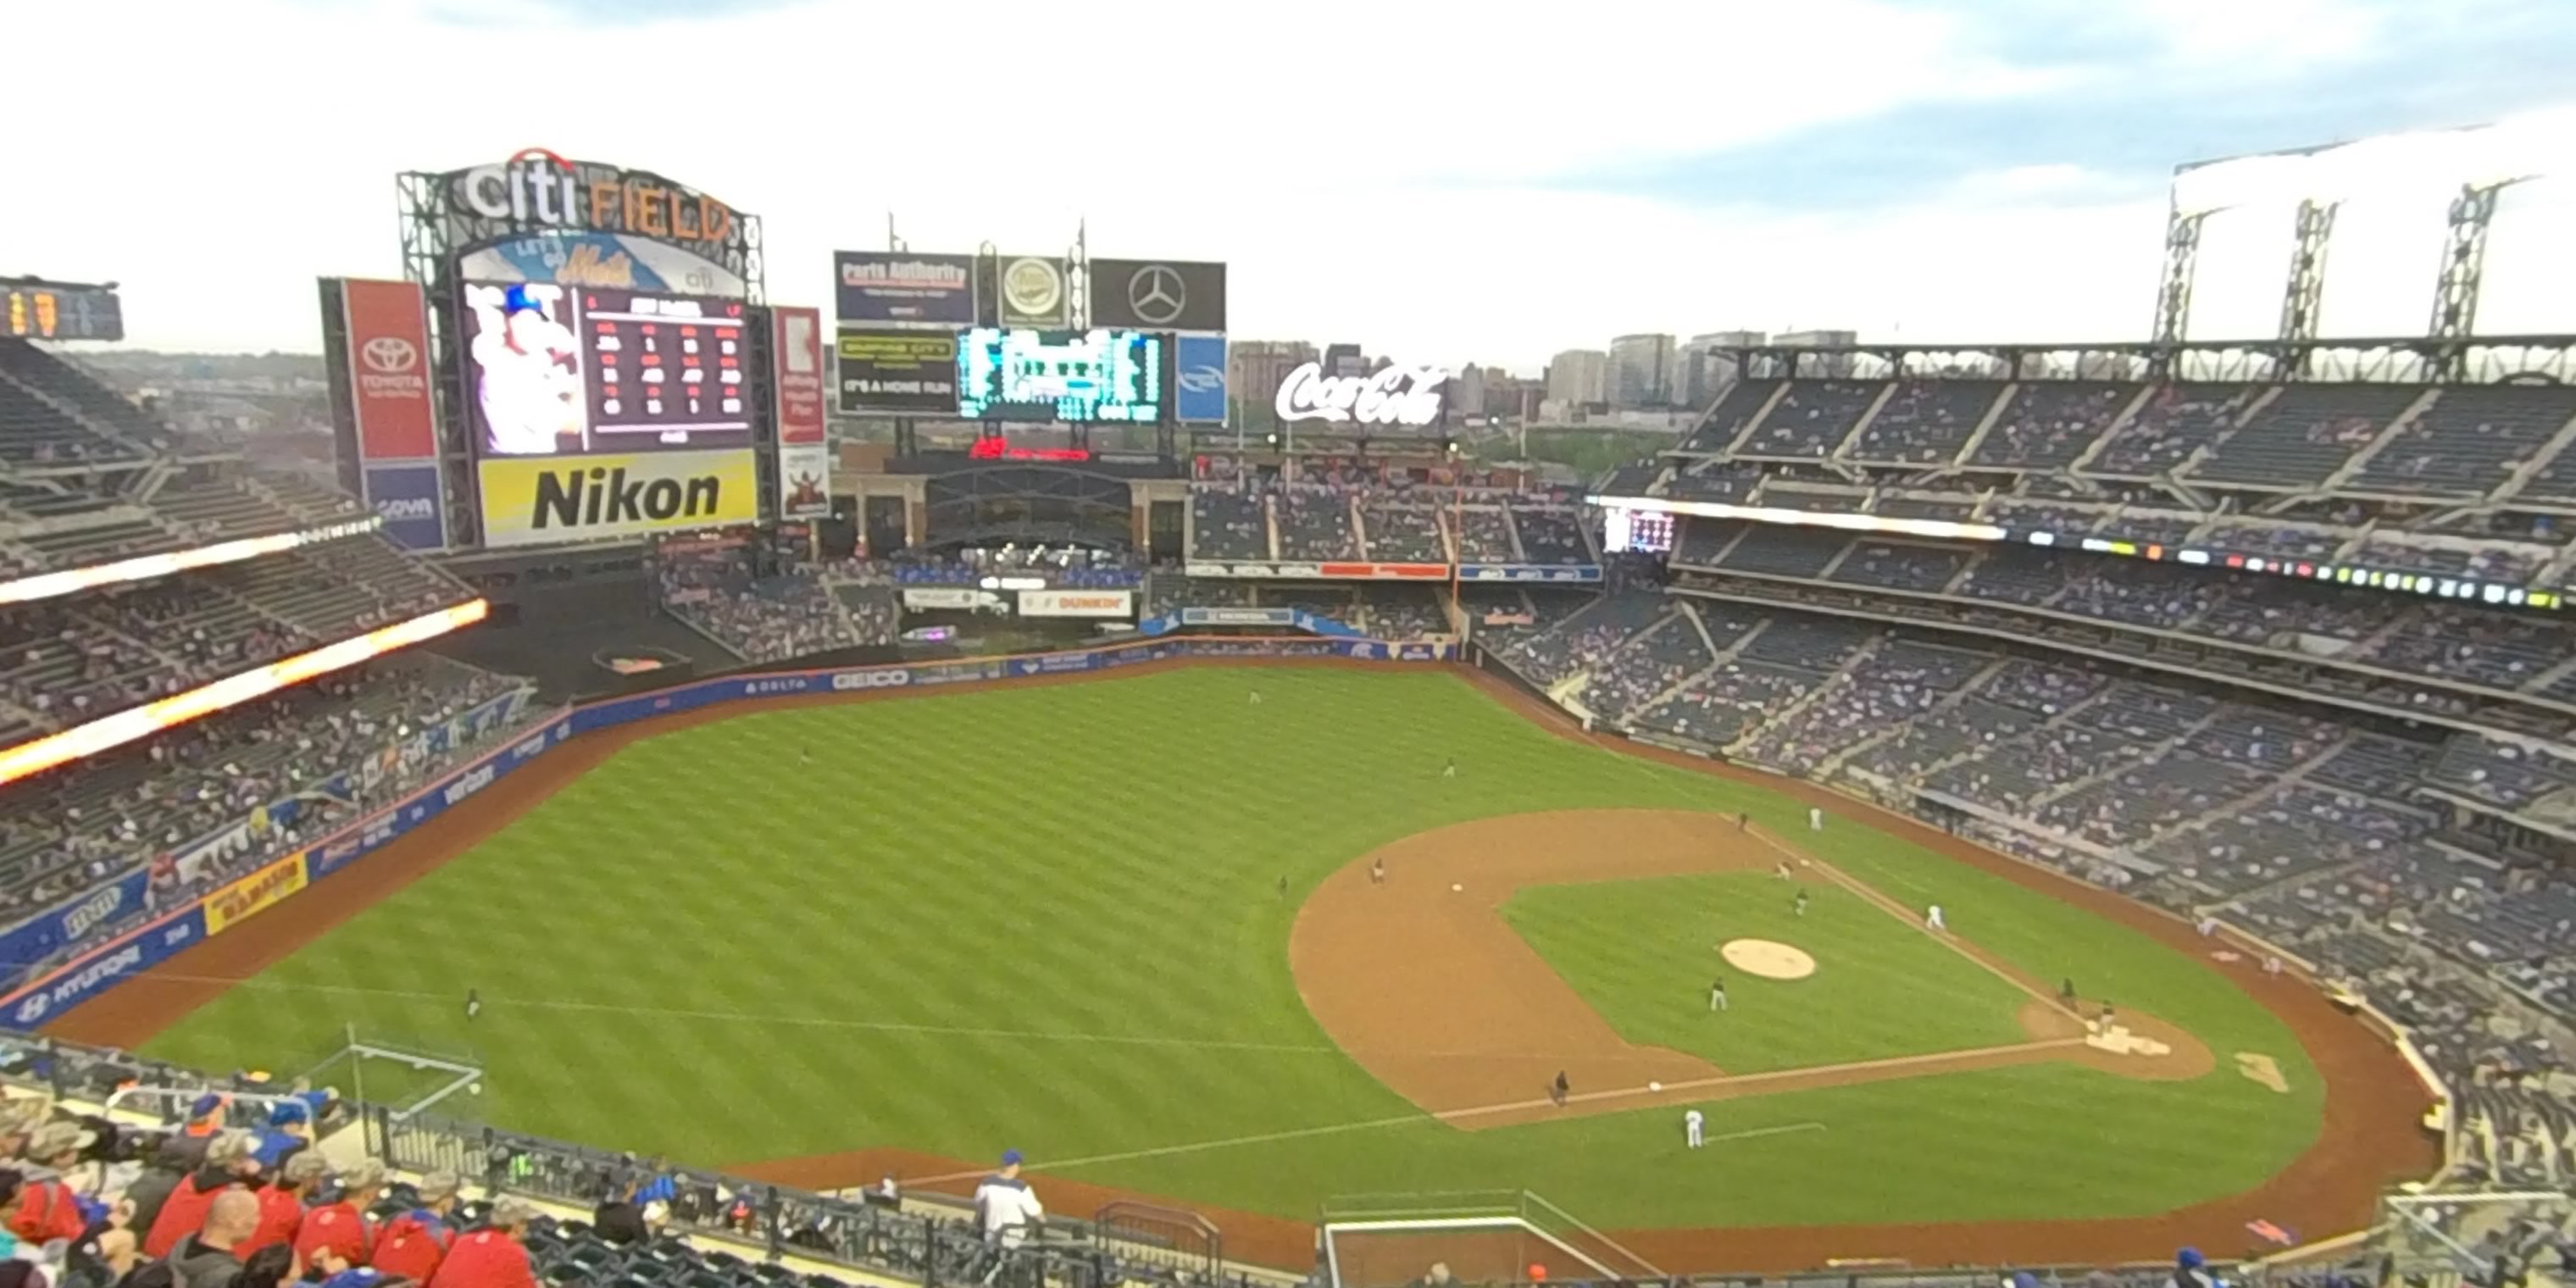 section 523 panoramic seat view  - citi field